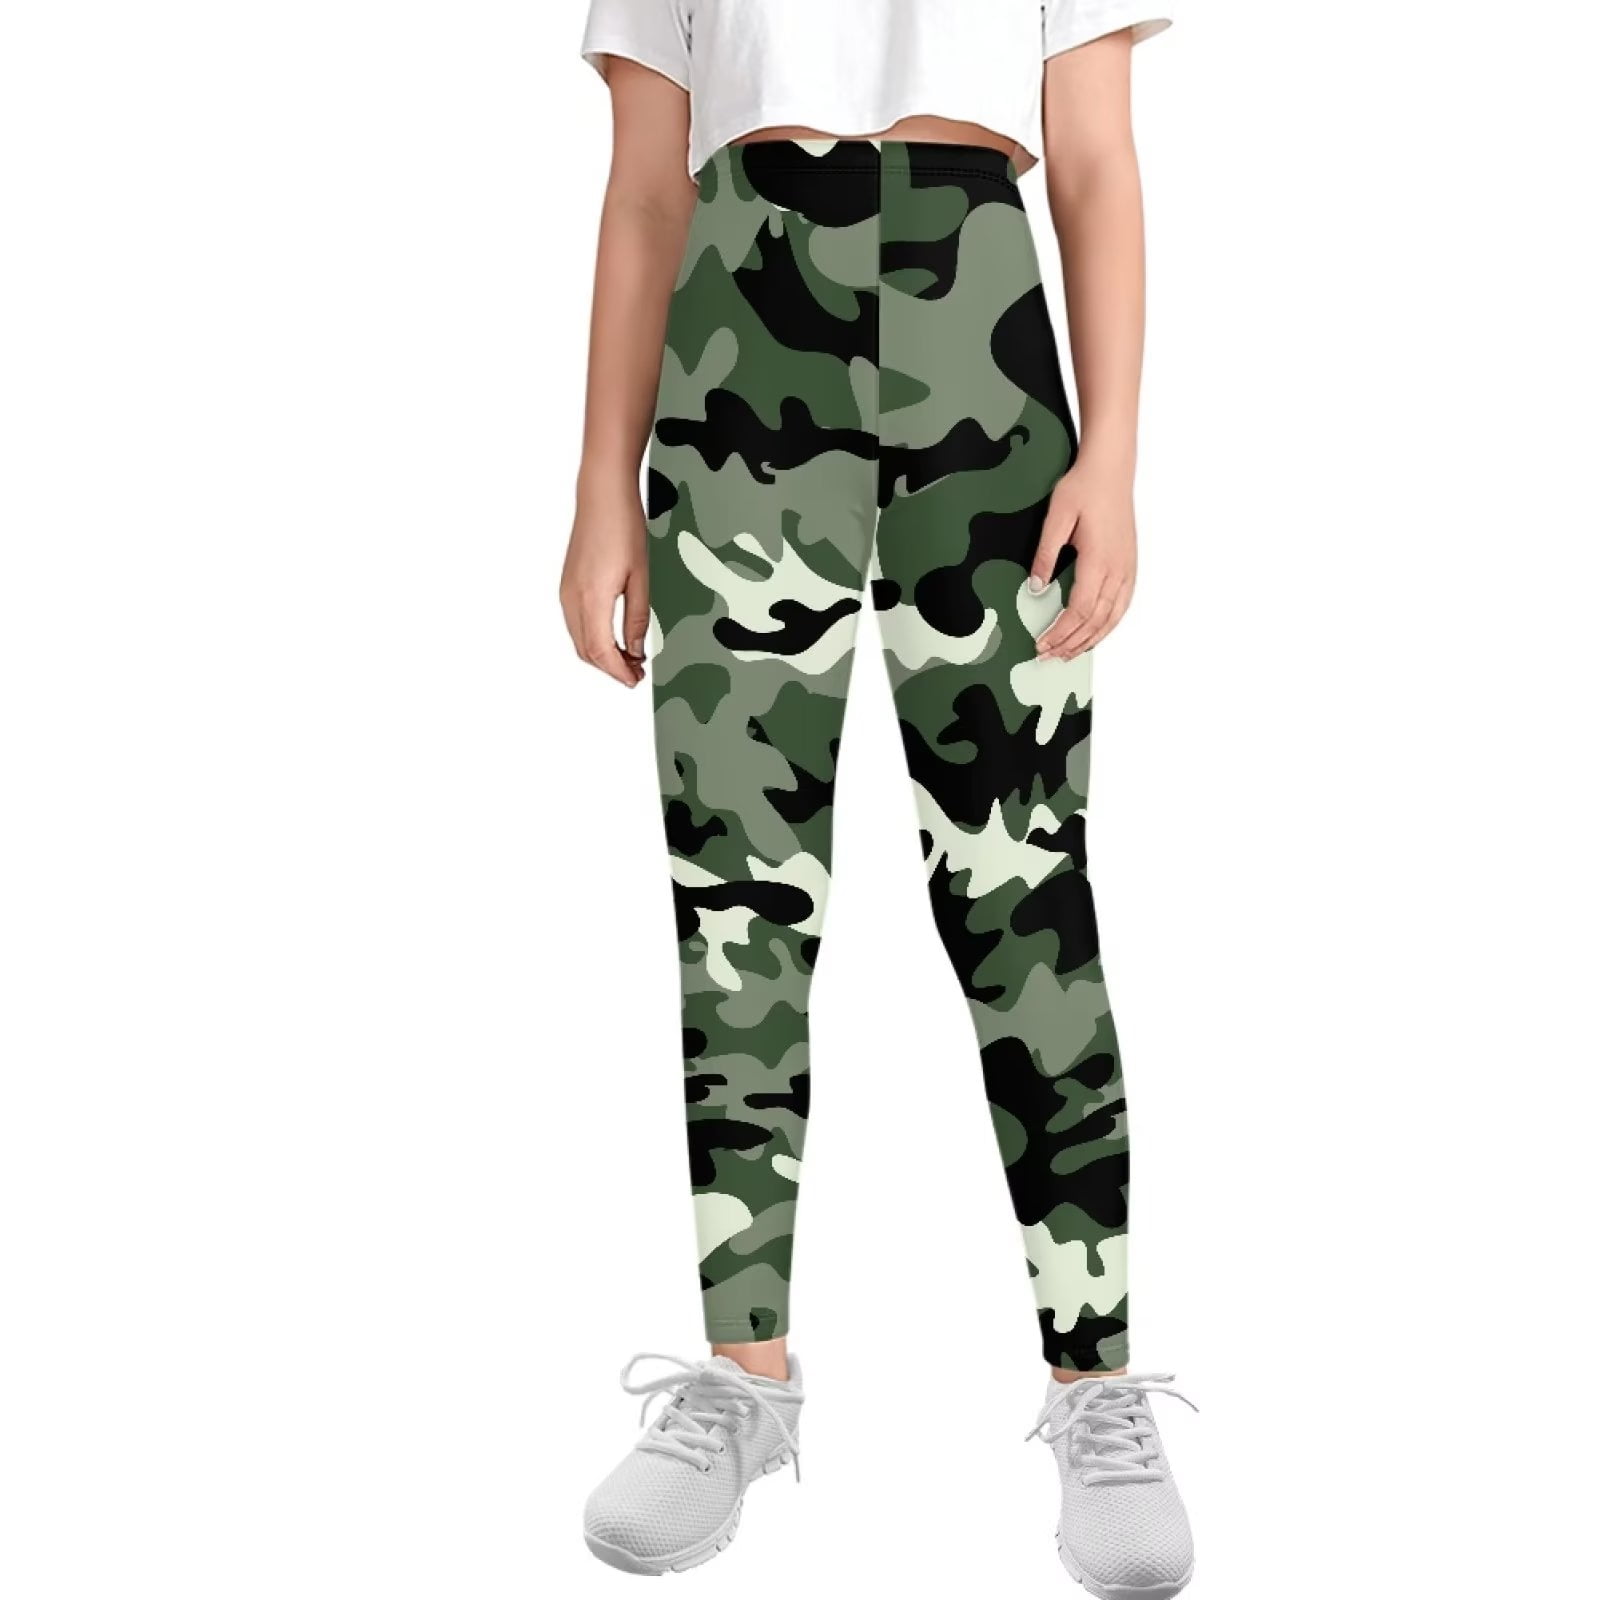 FKELYI Camo Hunting Army Girls Leggings Size 6-7 Years Breathable